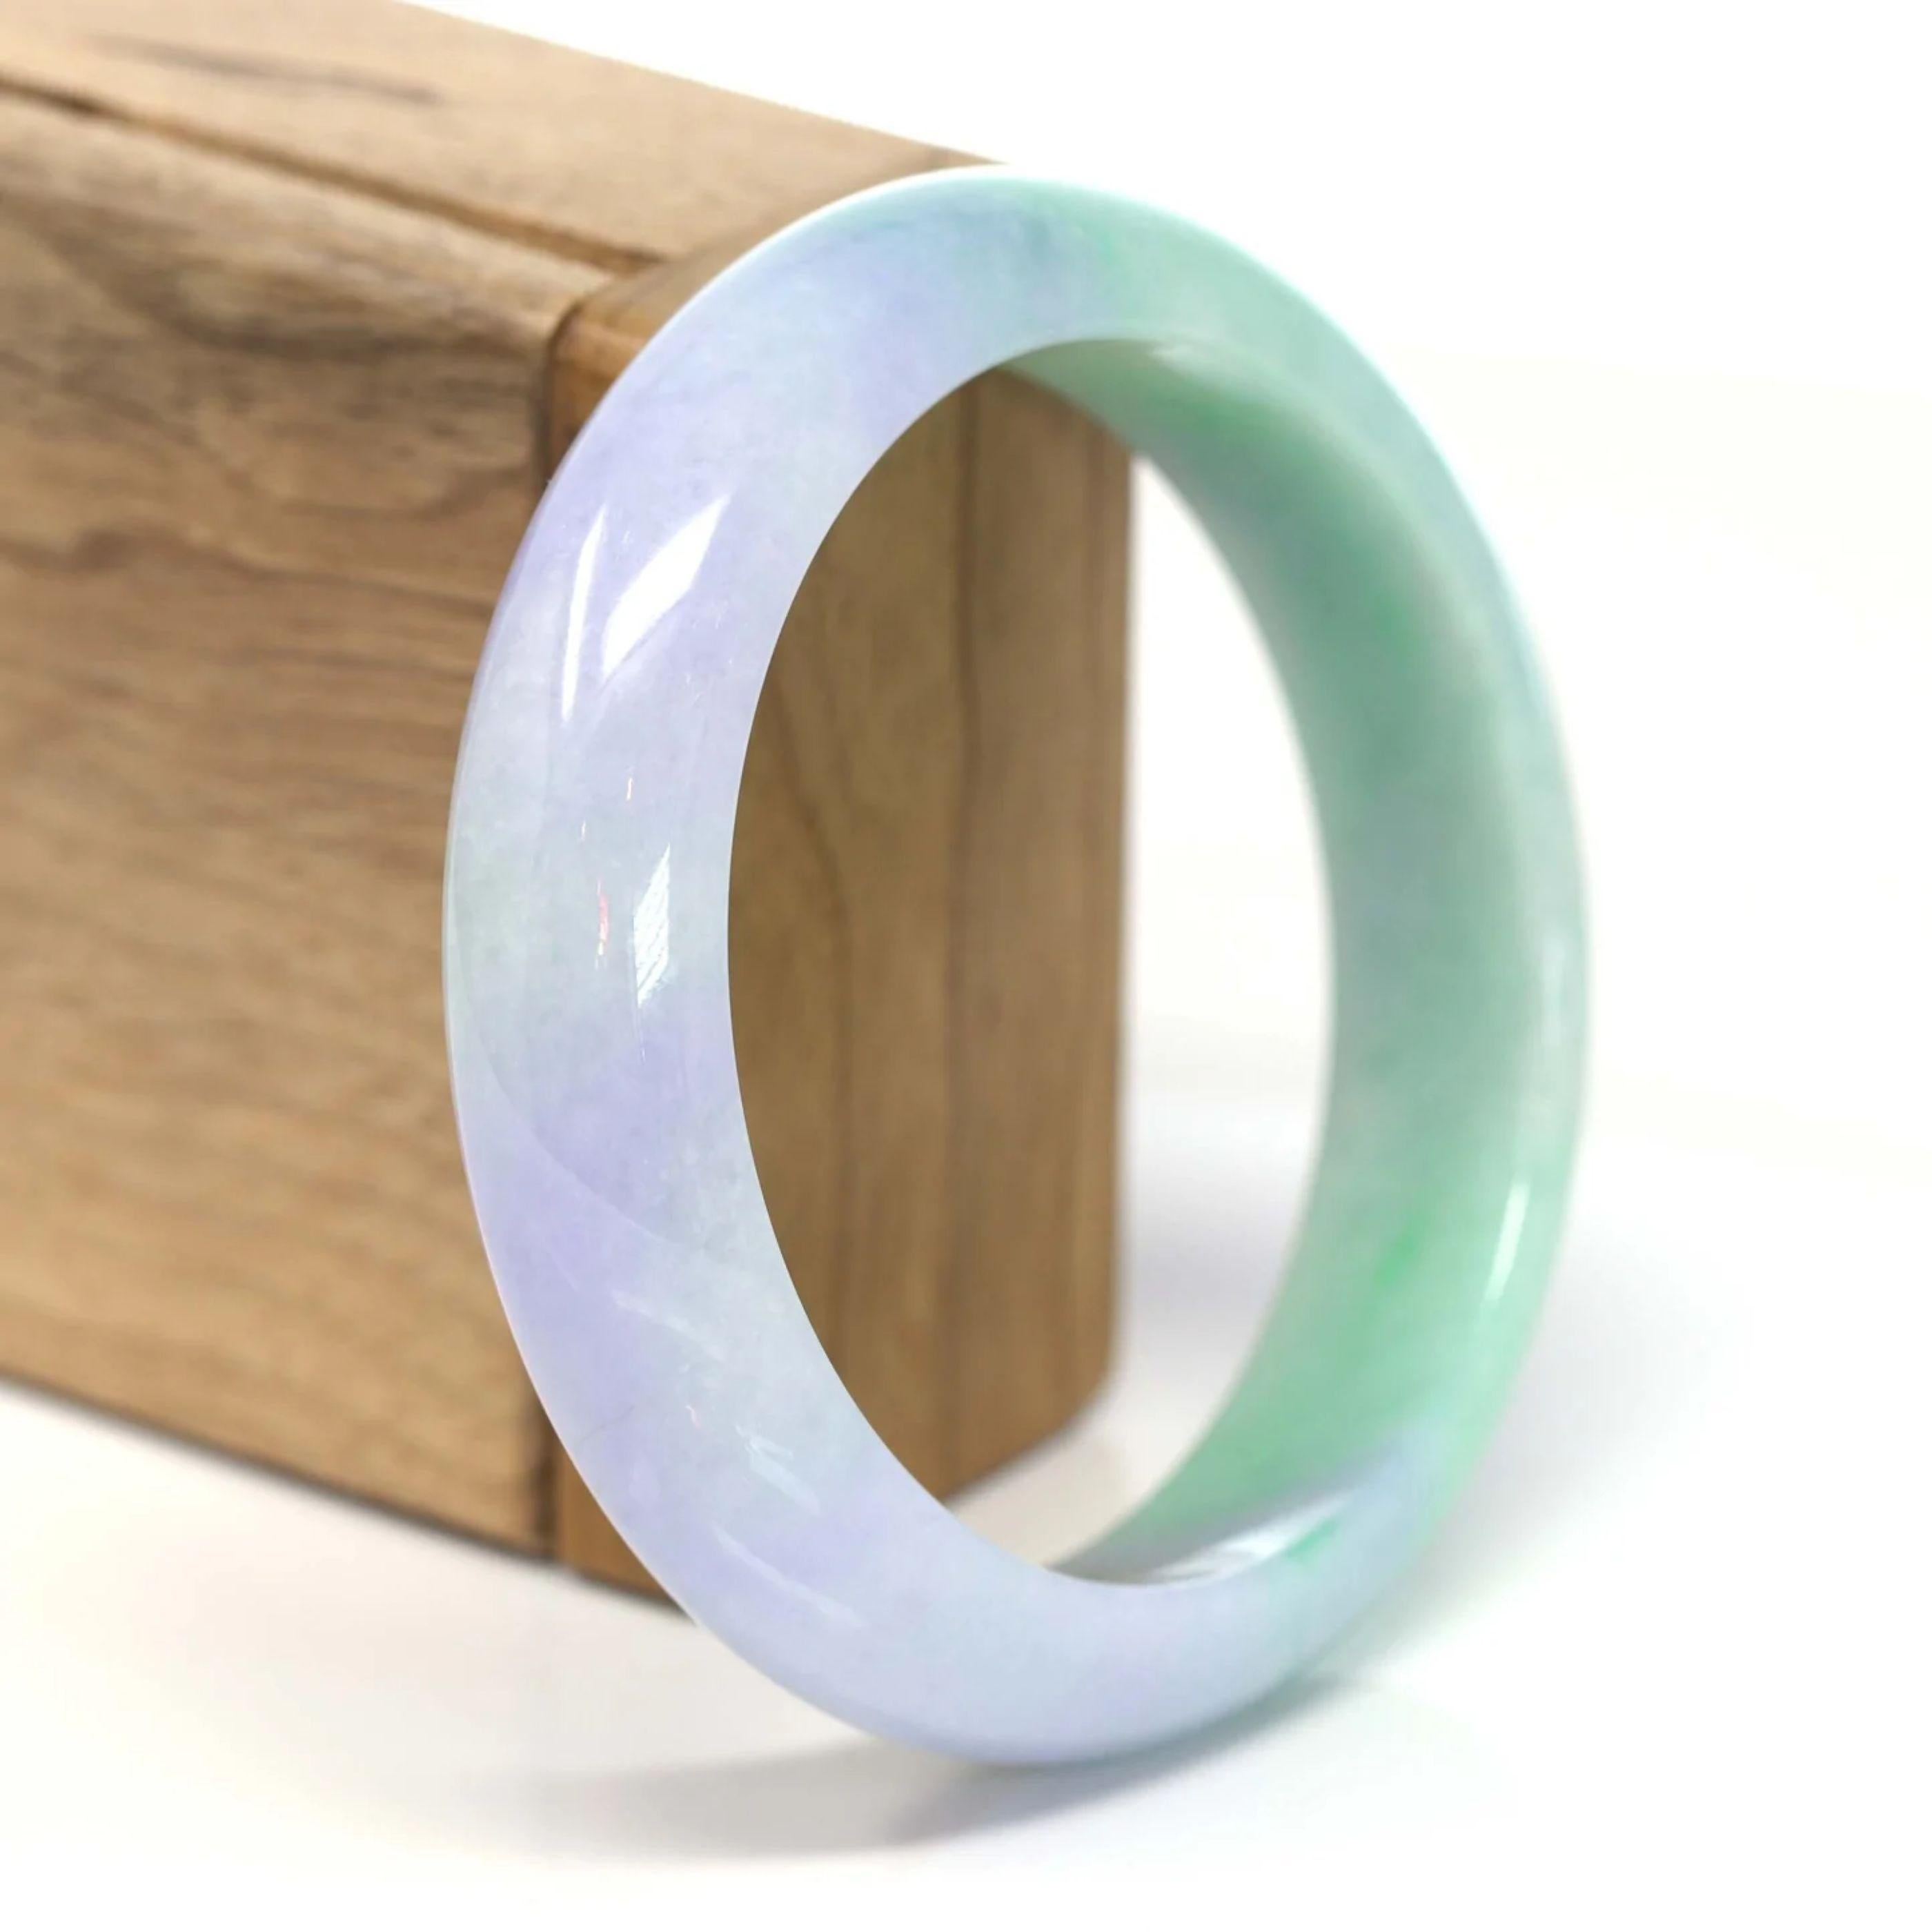 * INTRODUCTION--- Genuine Burmese Jadeite Jade Bangle Bracelet. This bangle is made with very high-quality genuine Burmese Jadeite jade, The jade texture is very smooth and translucent with lavender and green colors inside. This whole bangle is a